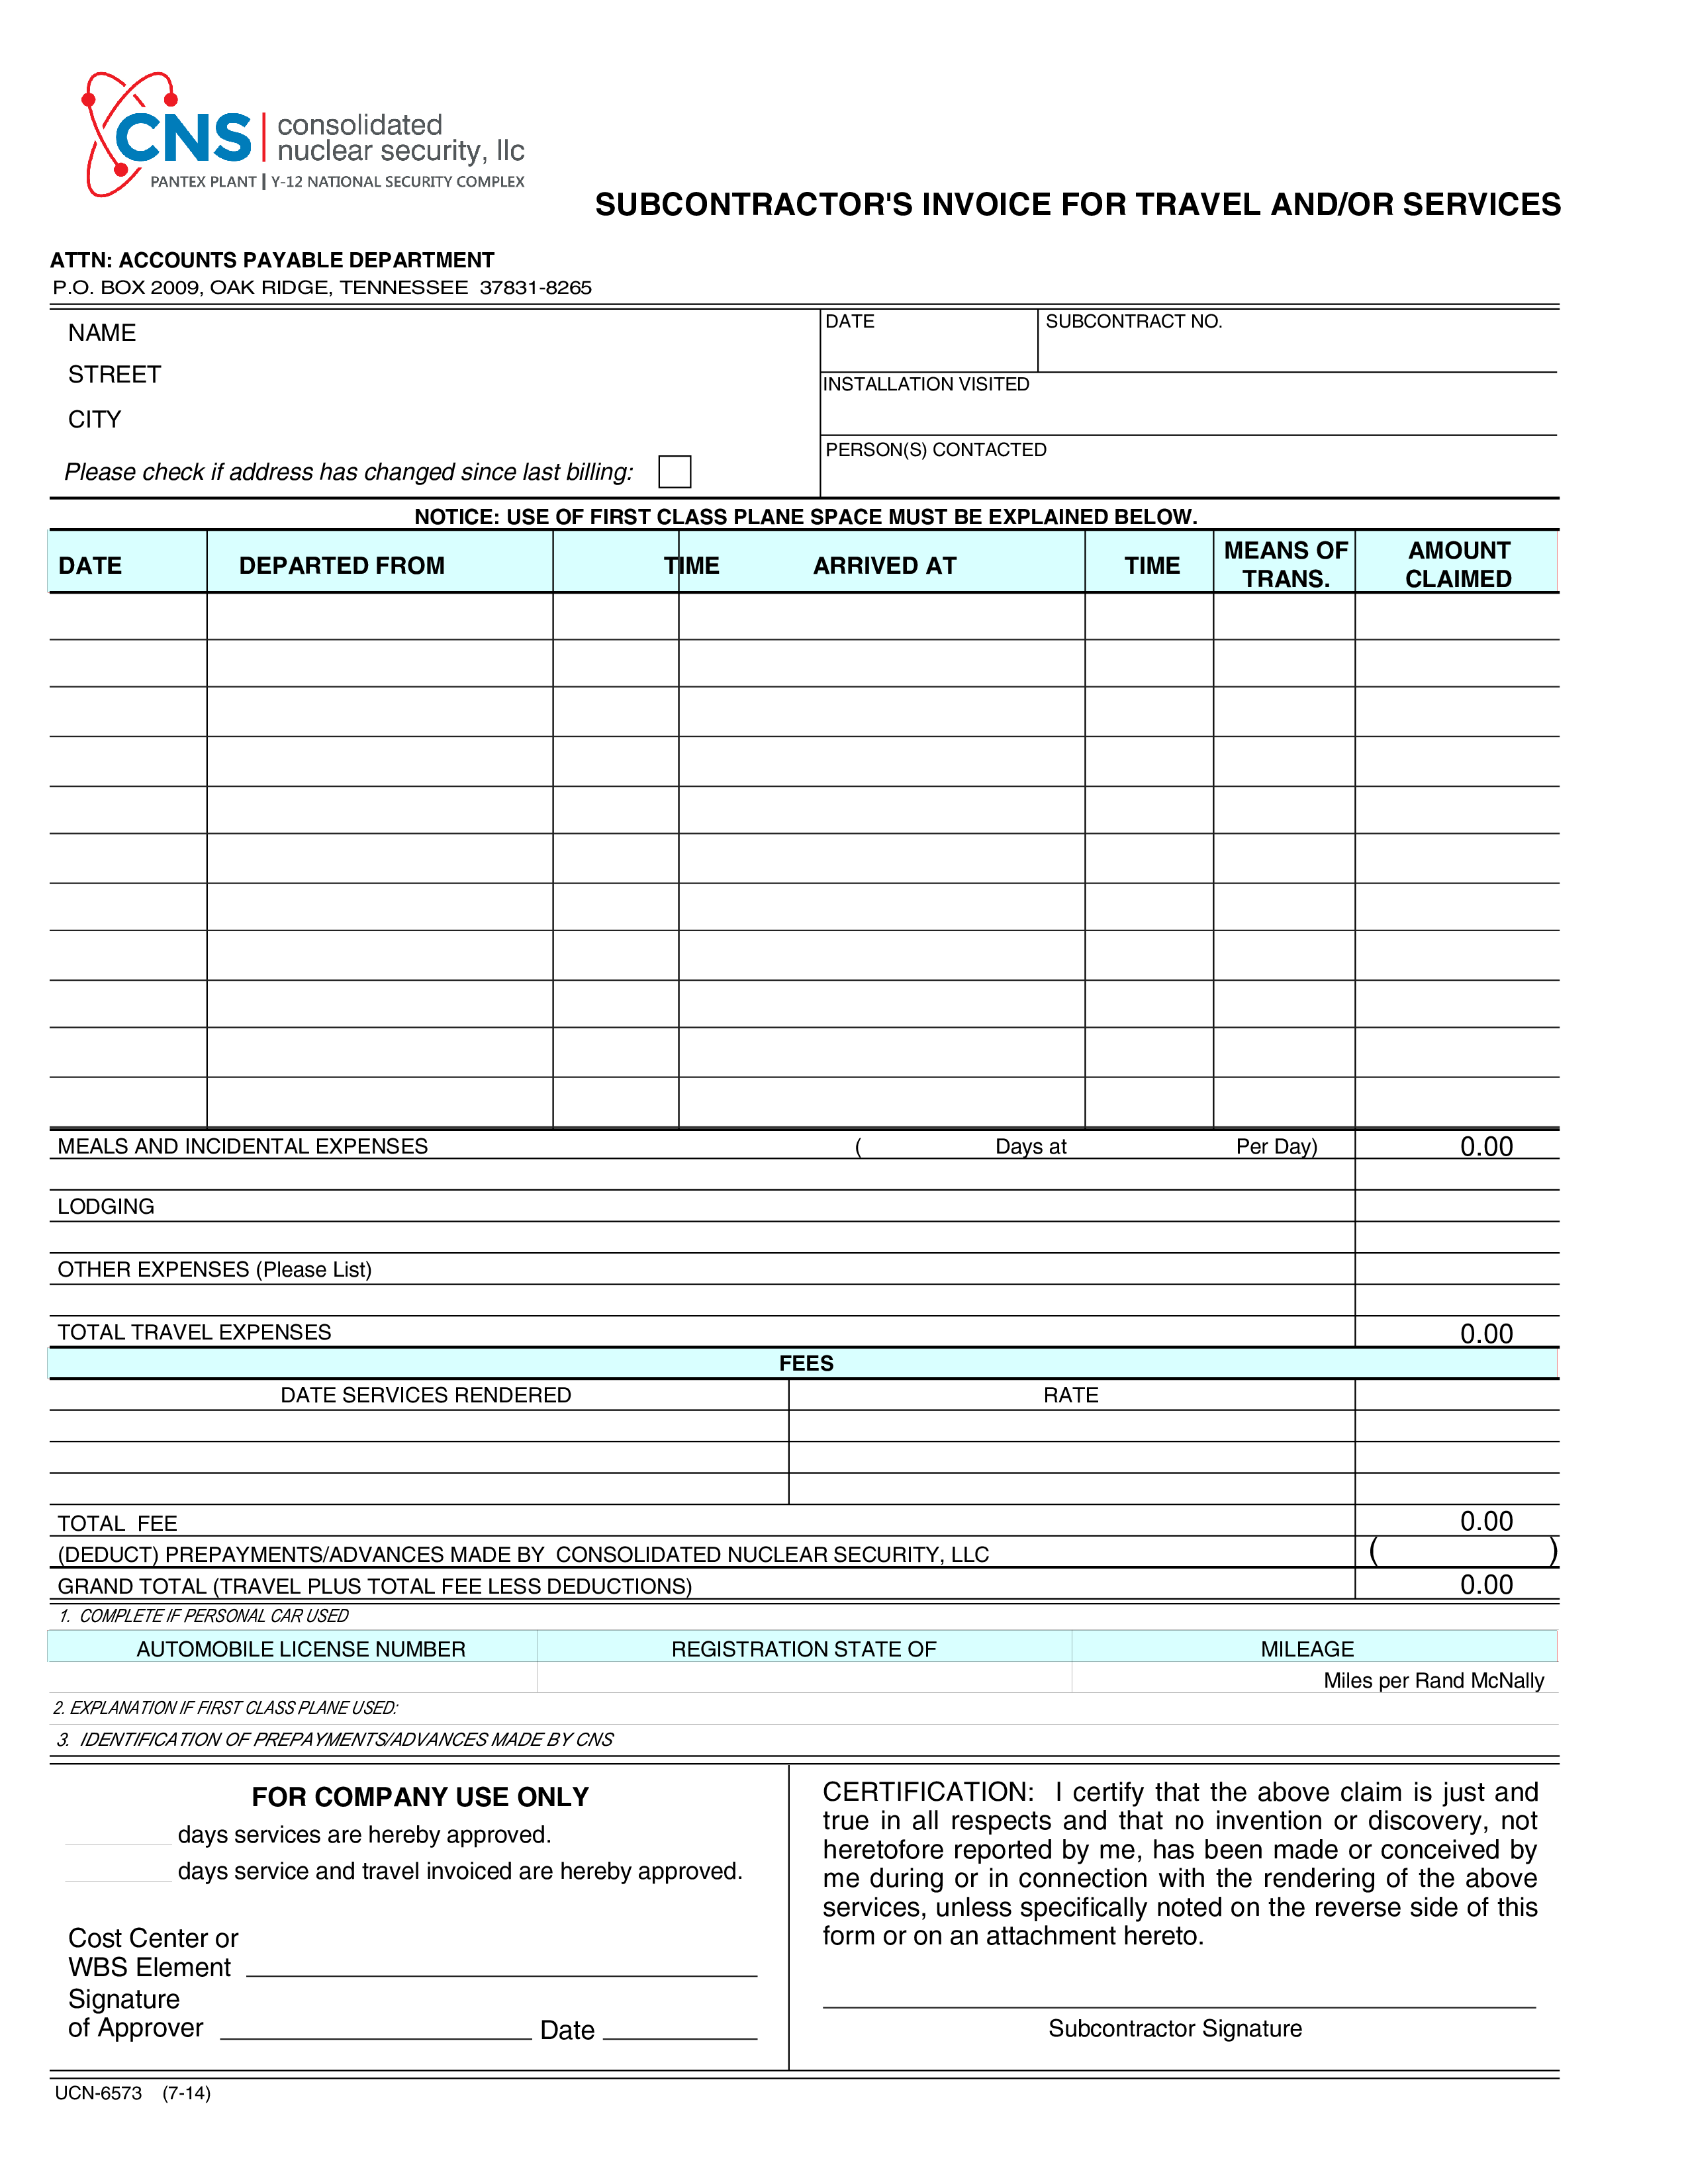 Subcontractor Invoice For Travel And/Or Services main image